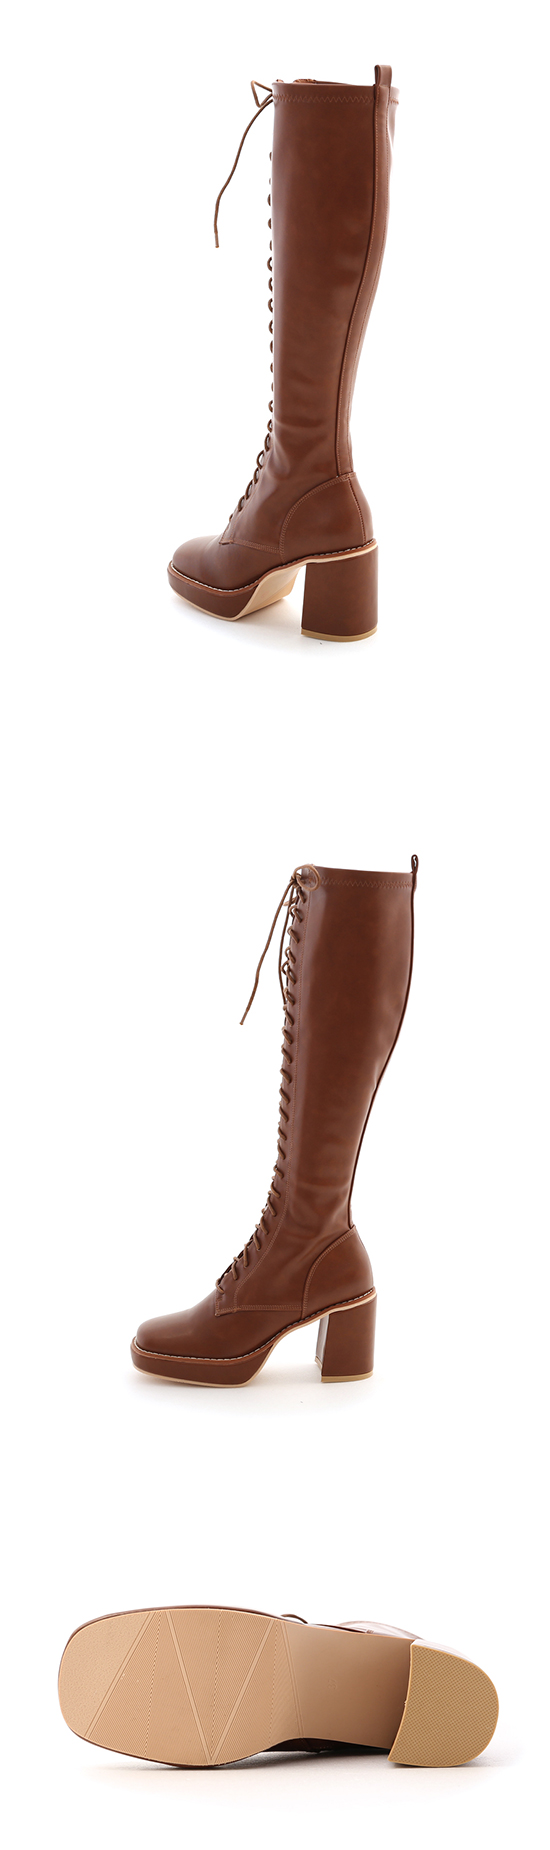 Thick Platform Lace-Up Under-The-Knee Boots Brown